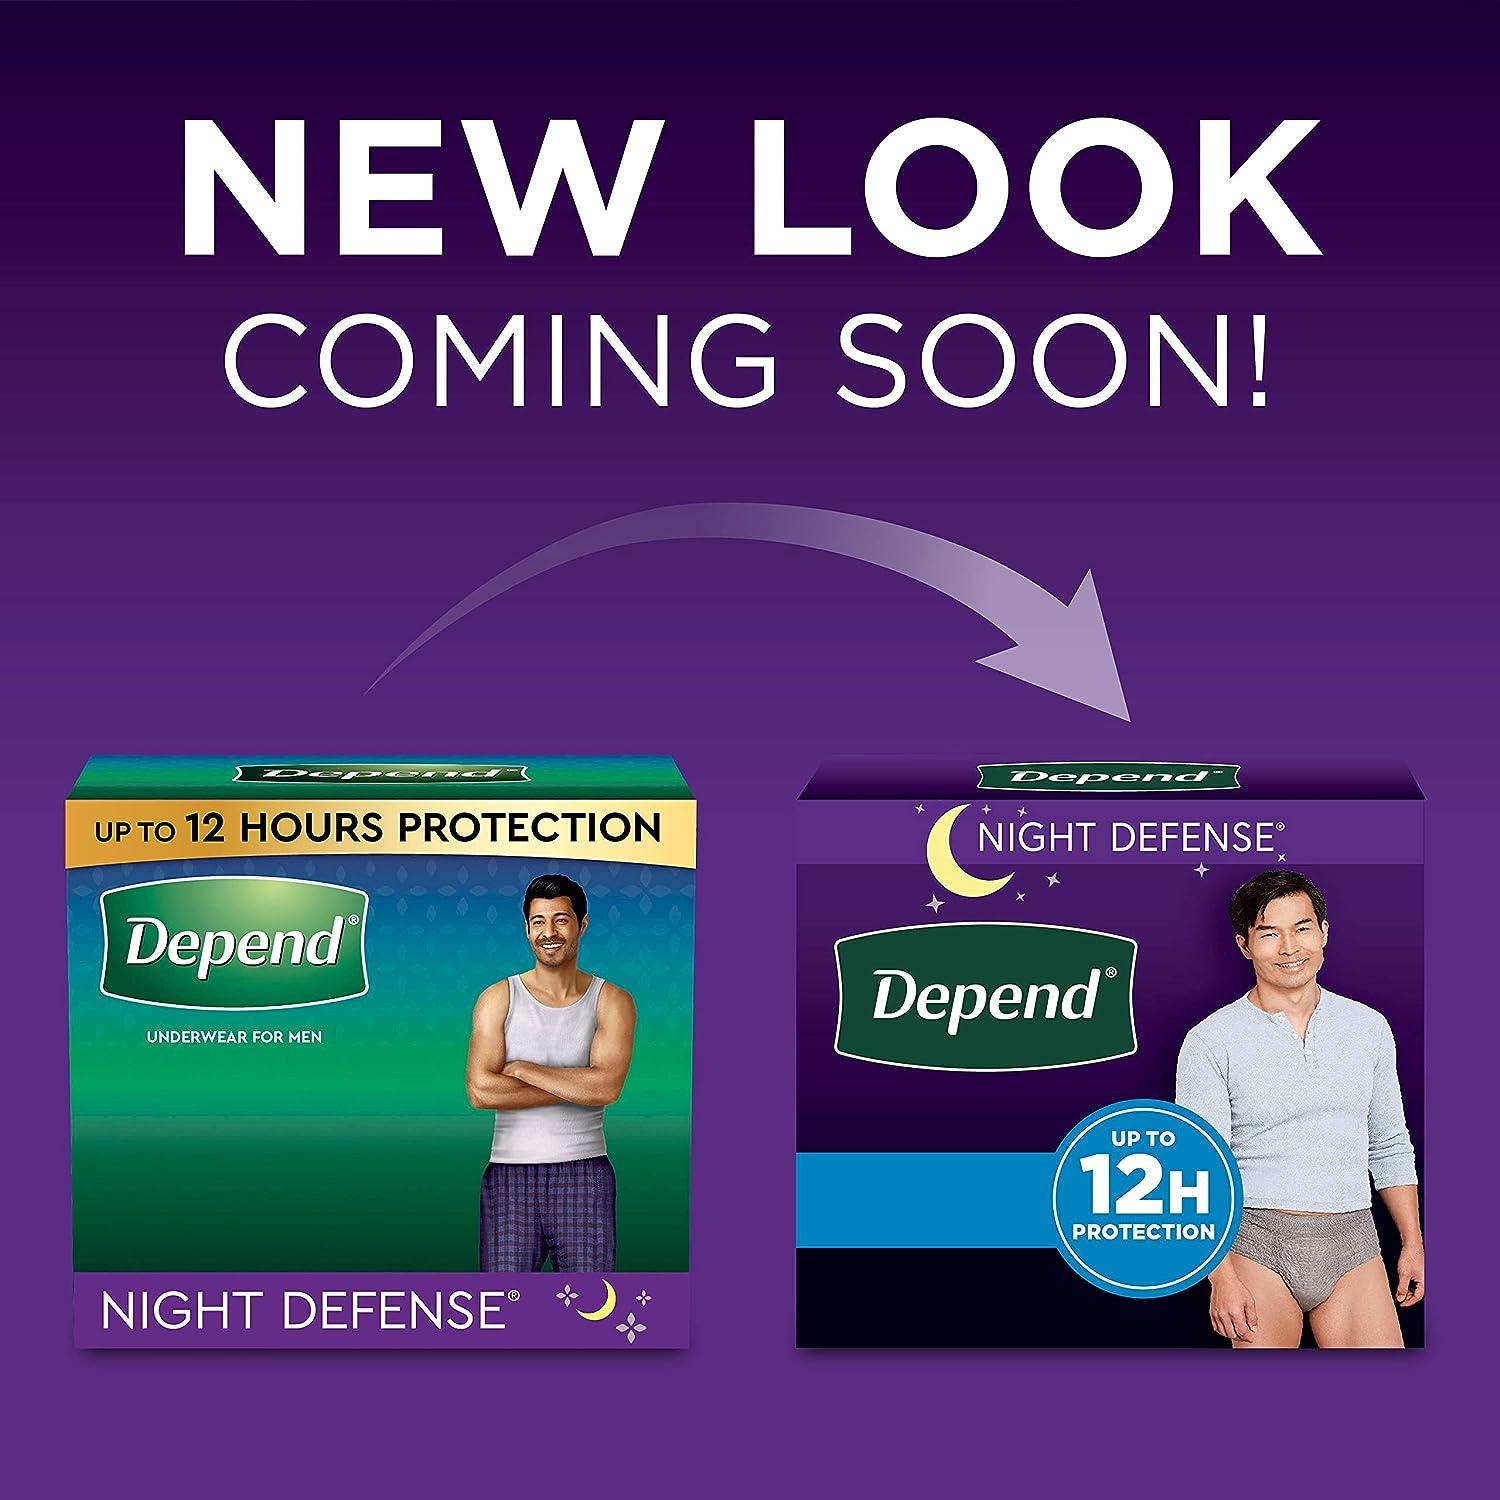 Depend Night Defense Incontinence Overnight Underwear for